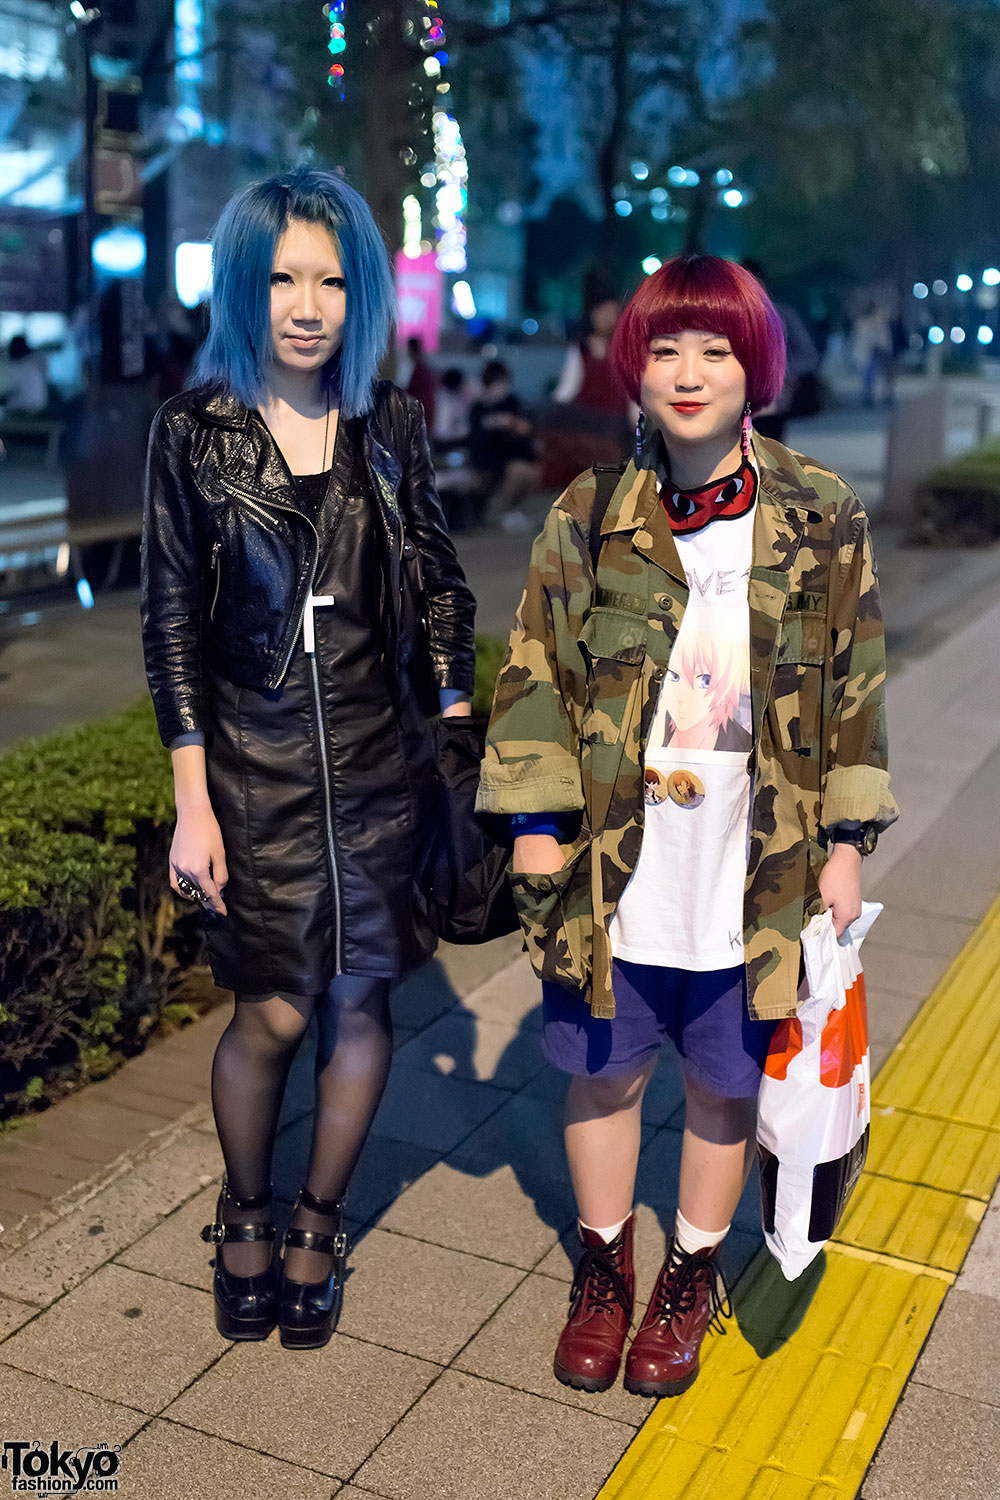 Blue Hair & Leather vs. Red Hair & Camo on the Street in Shinjuku